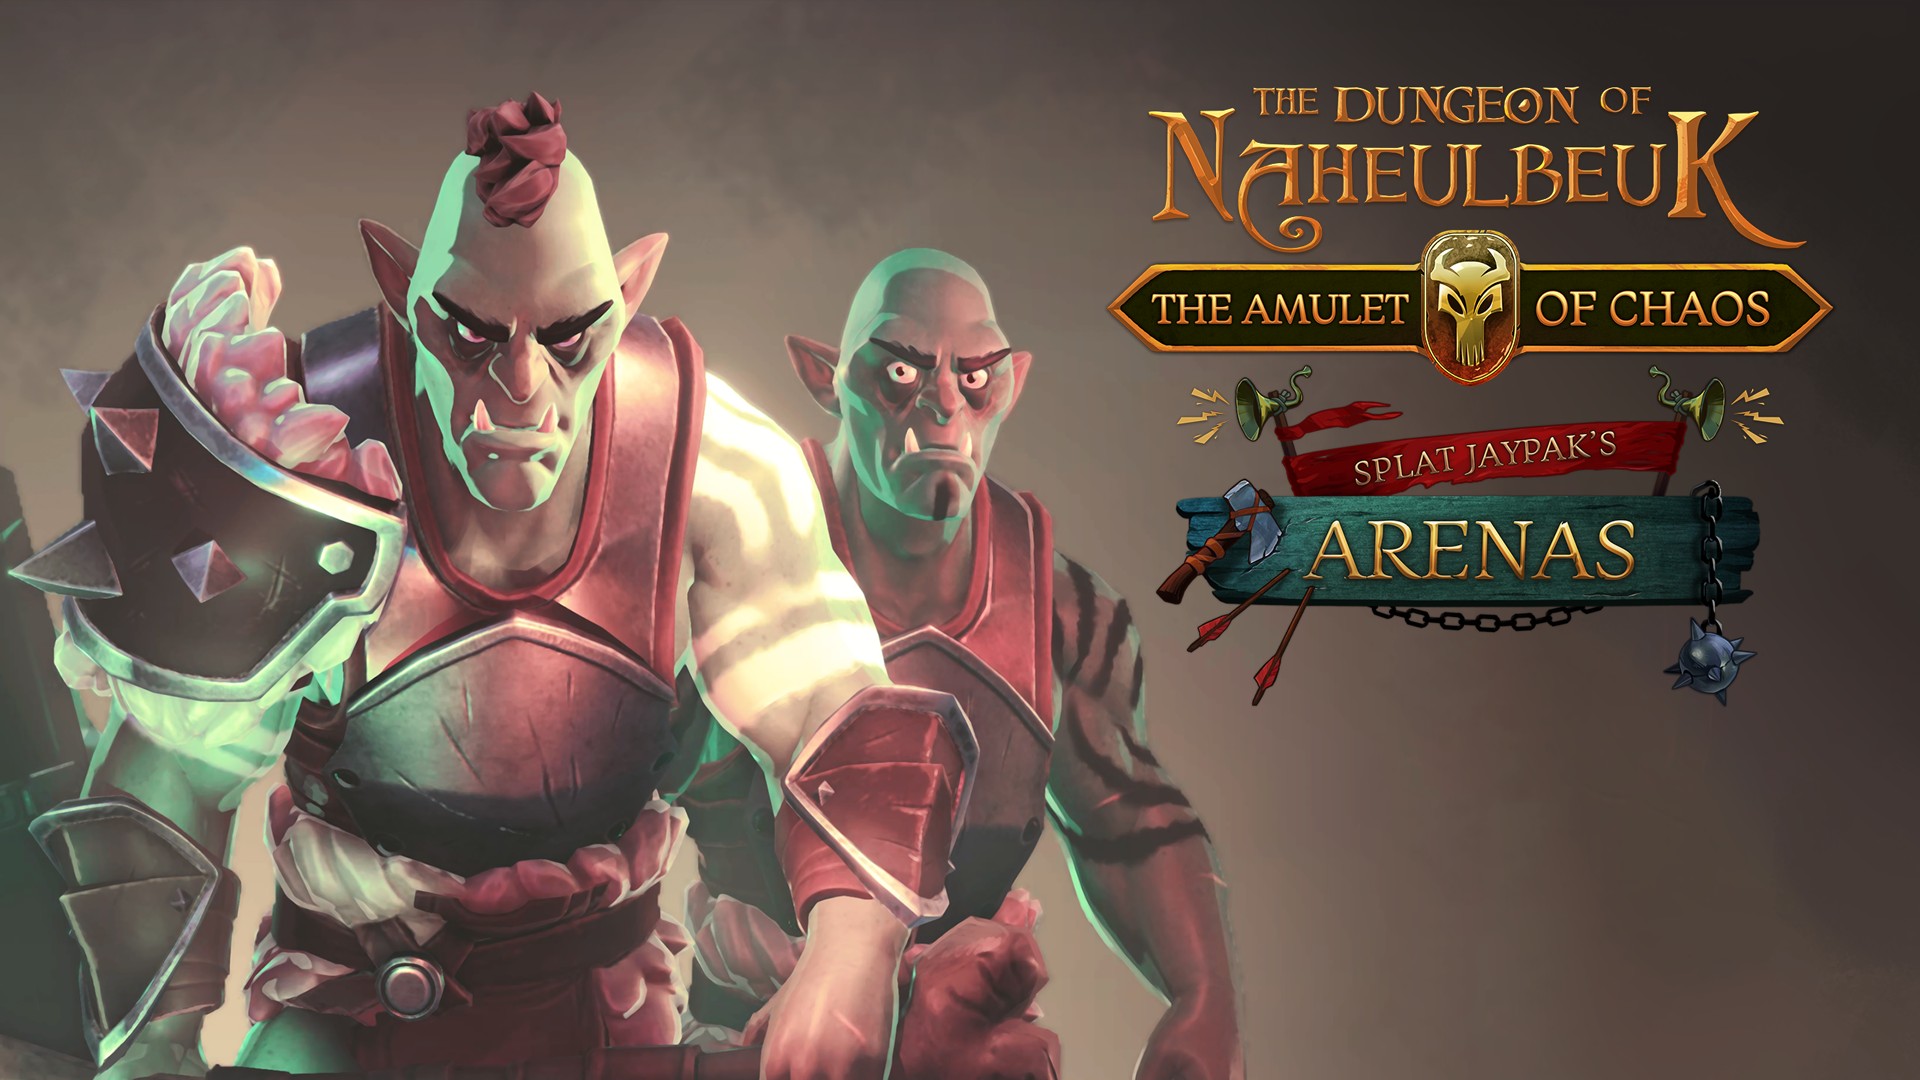 The Dungeon of Naheulbeuk: The Amulet of Chaos Invades Xbox Series X|S Along with New DLC